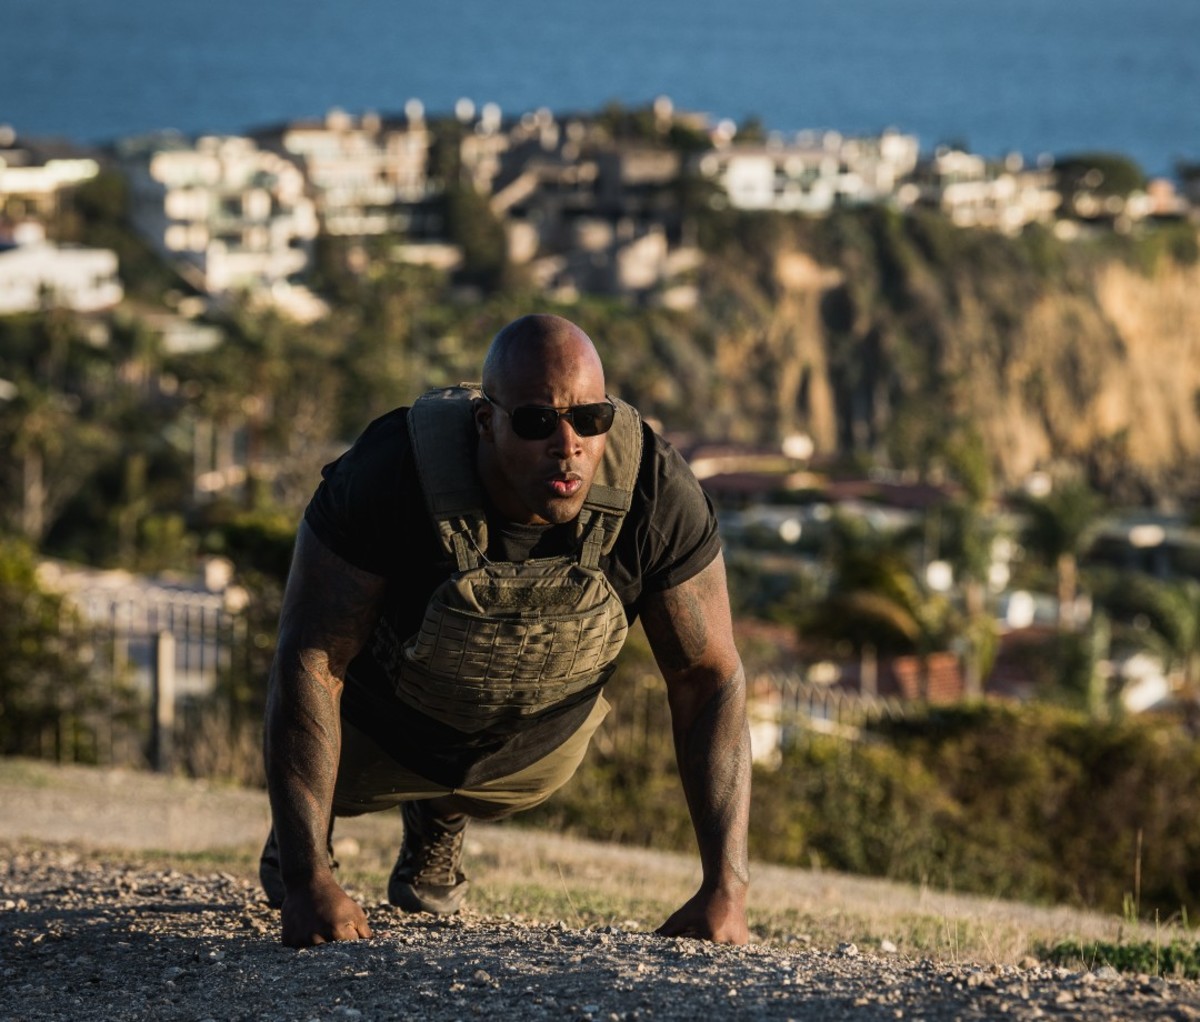 Man doing pushup wearing weighted vest outdoors